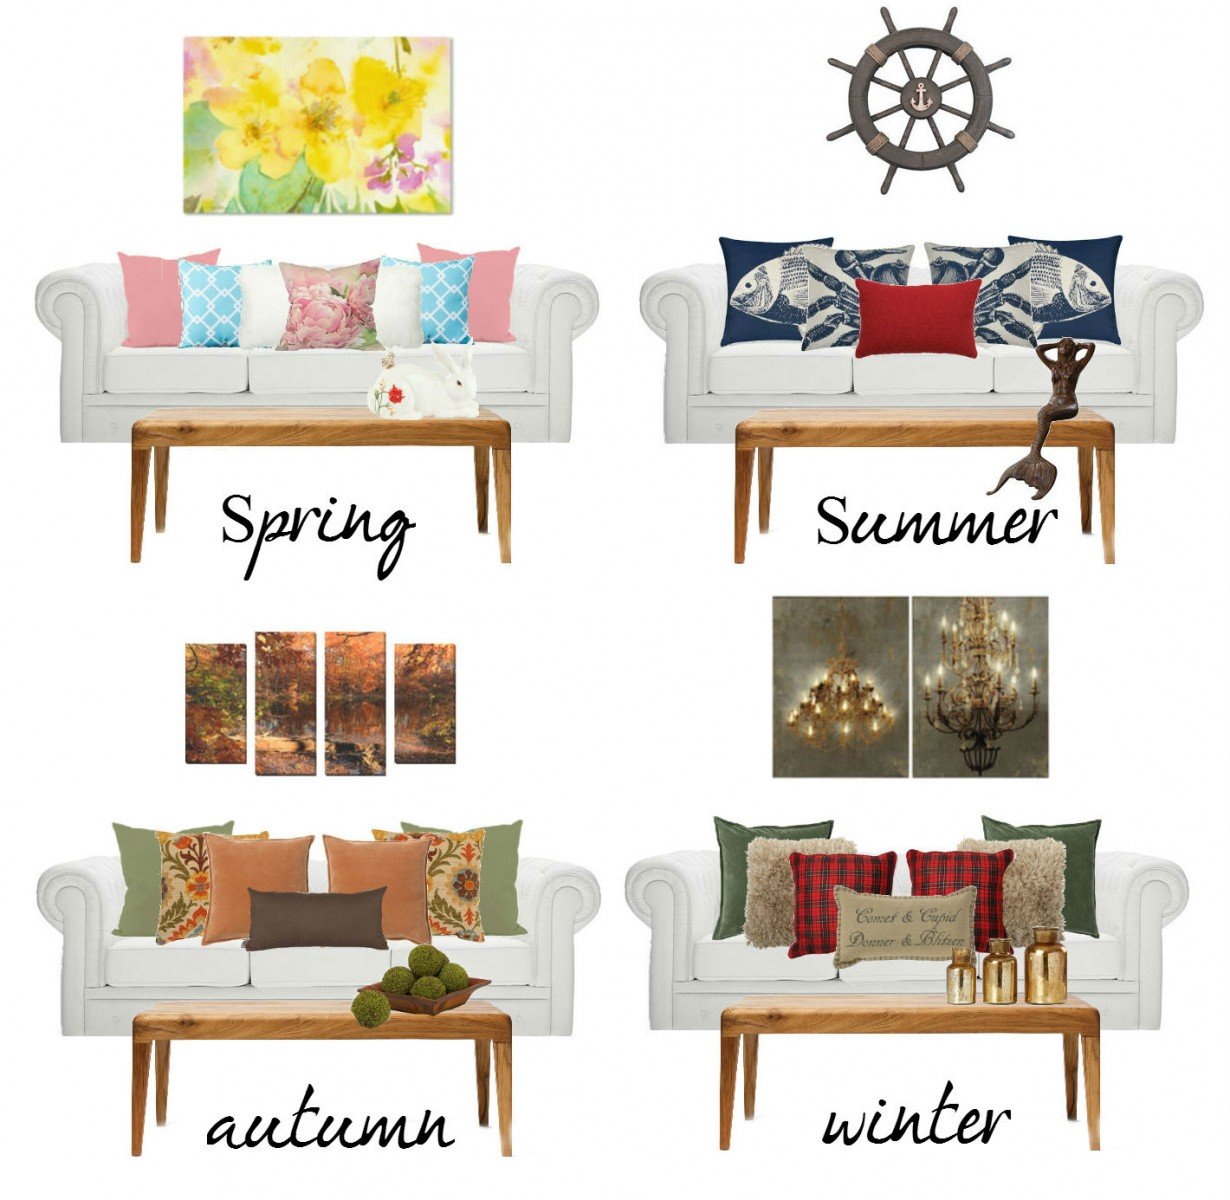 A collage of different styles of living room decor perfect for seasonal decorating.